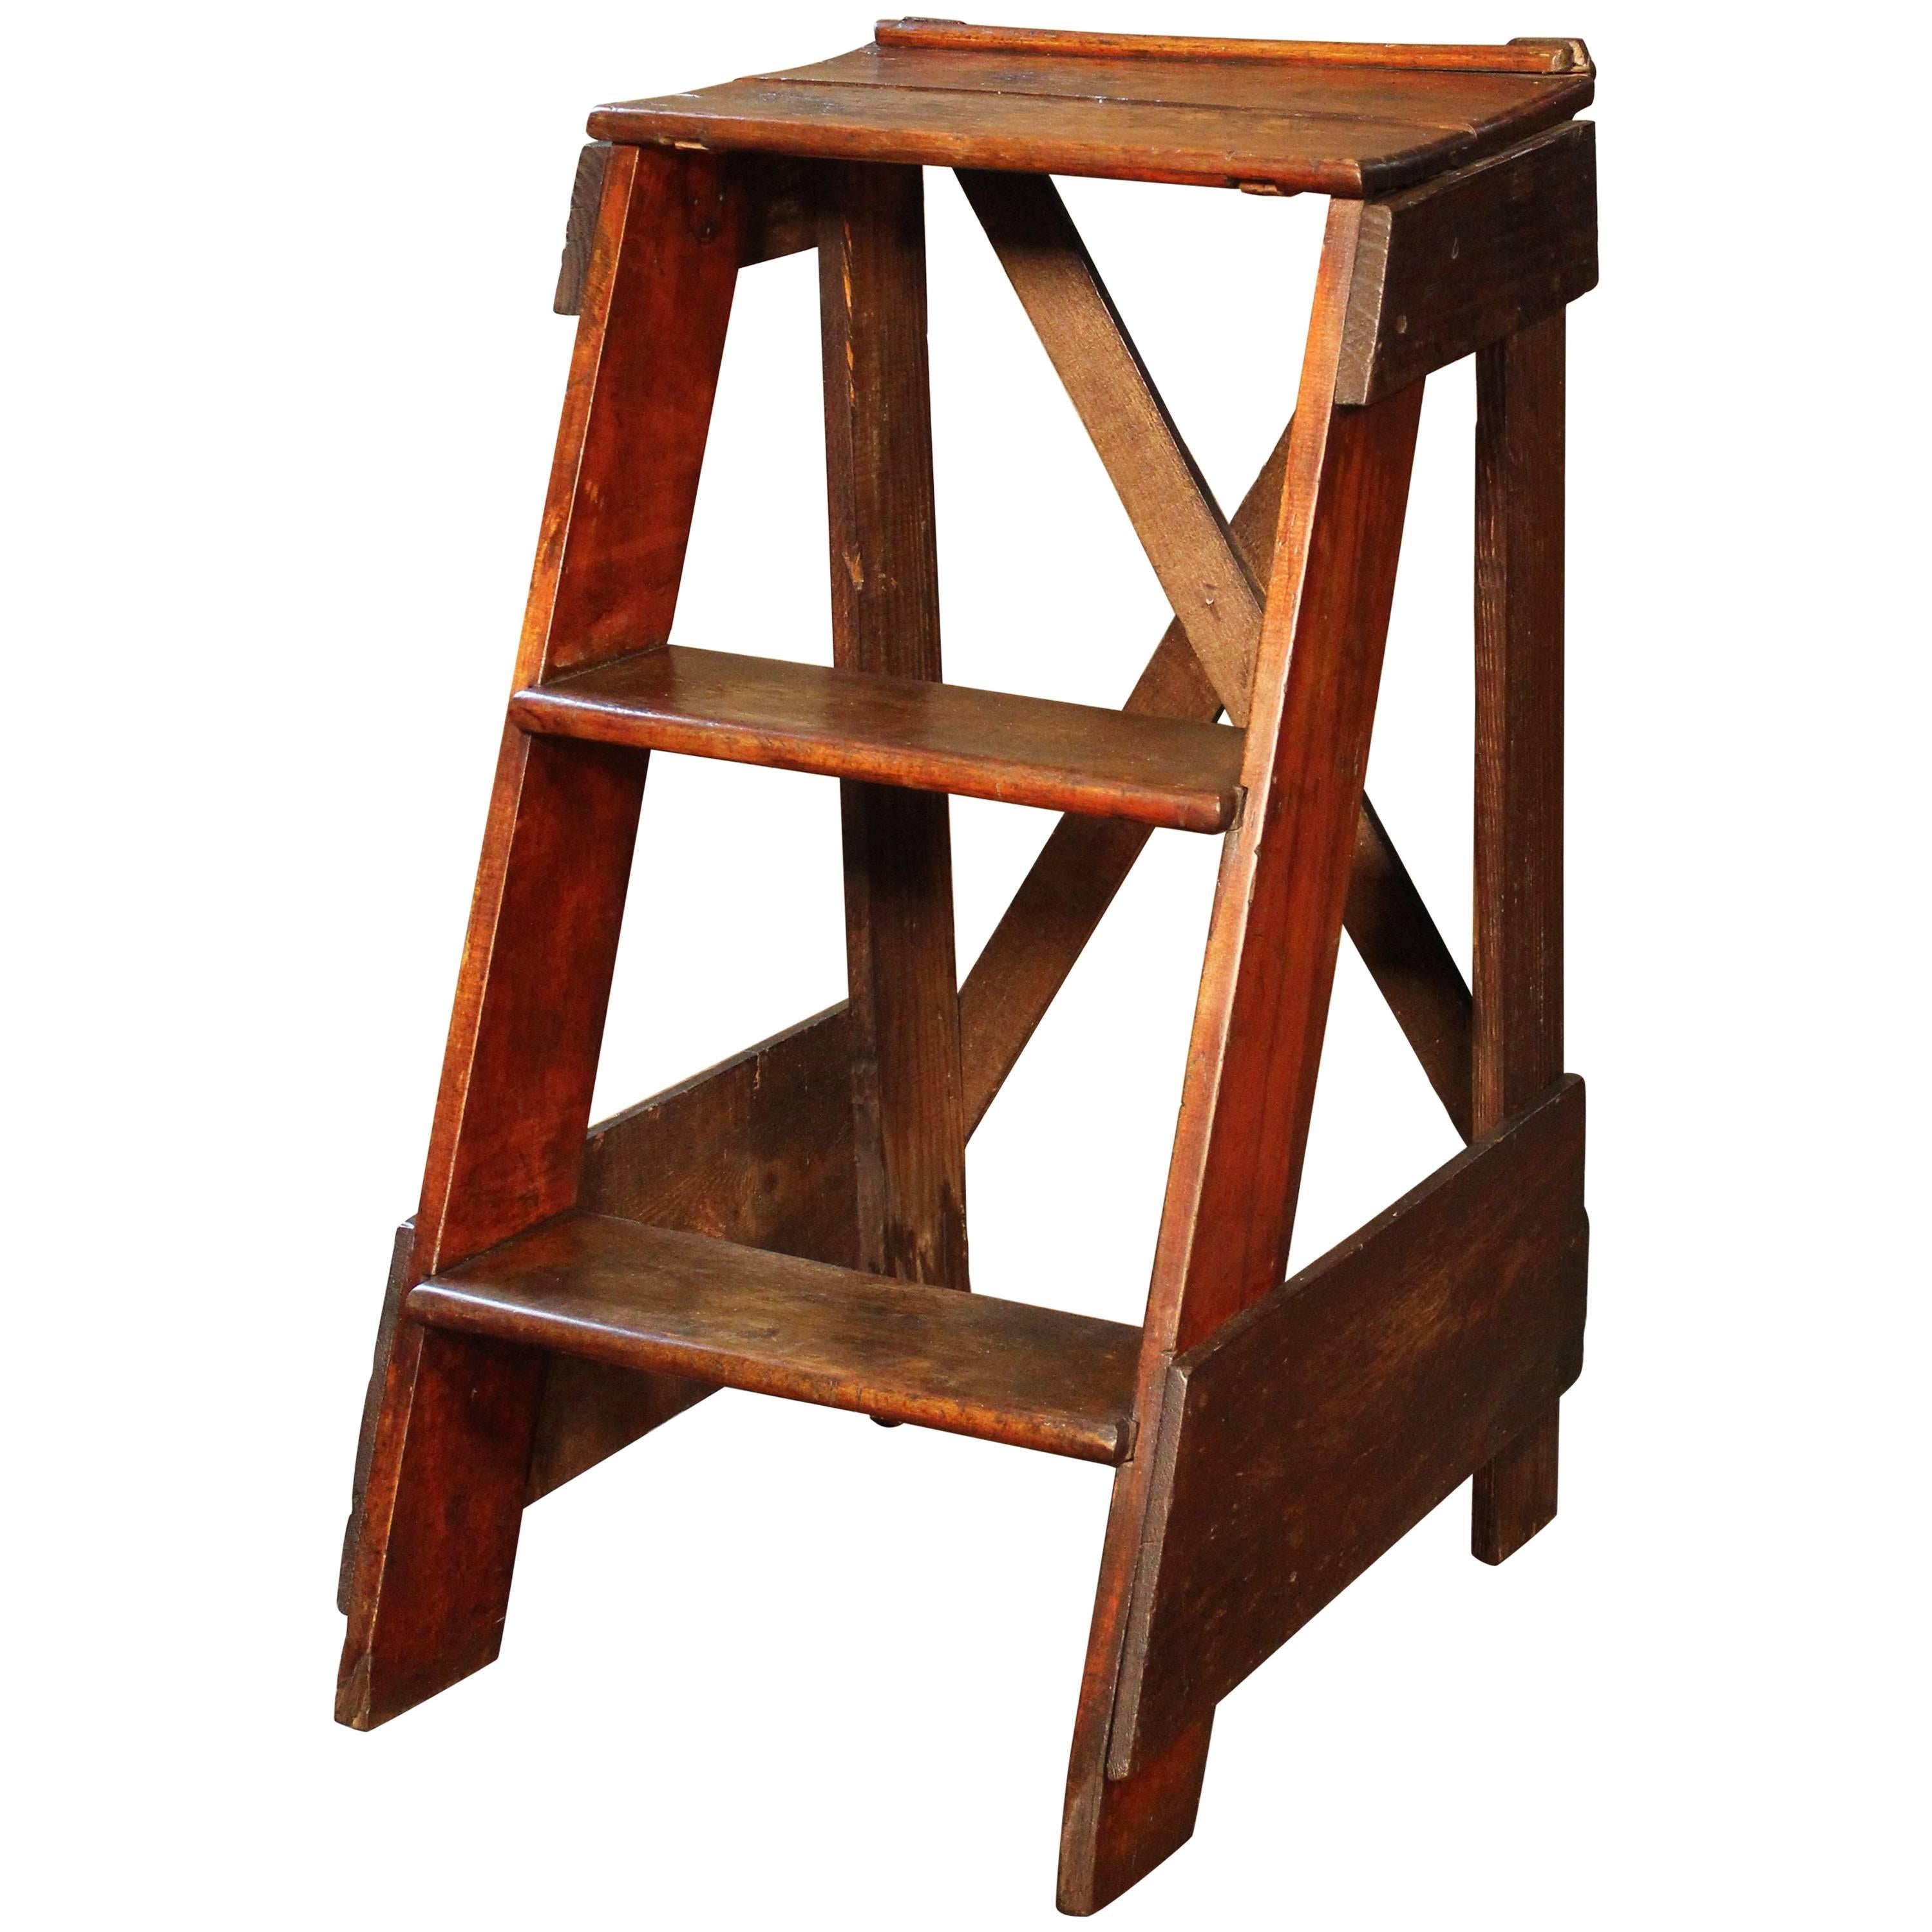 Wooden Step Ladder Vintage Antique Moveable Wood Factory Shop Ladder Stairs